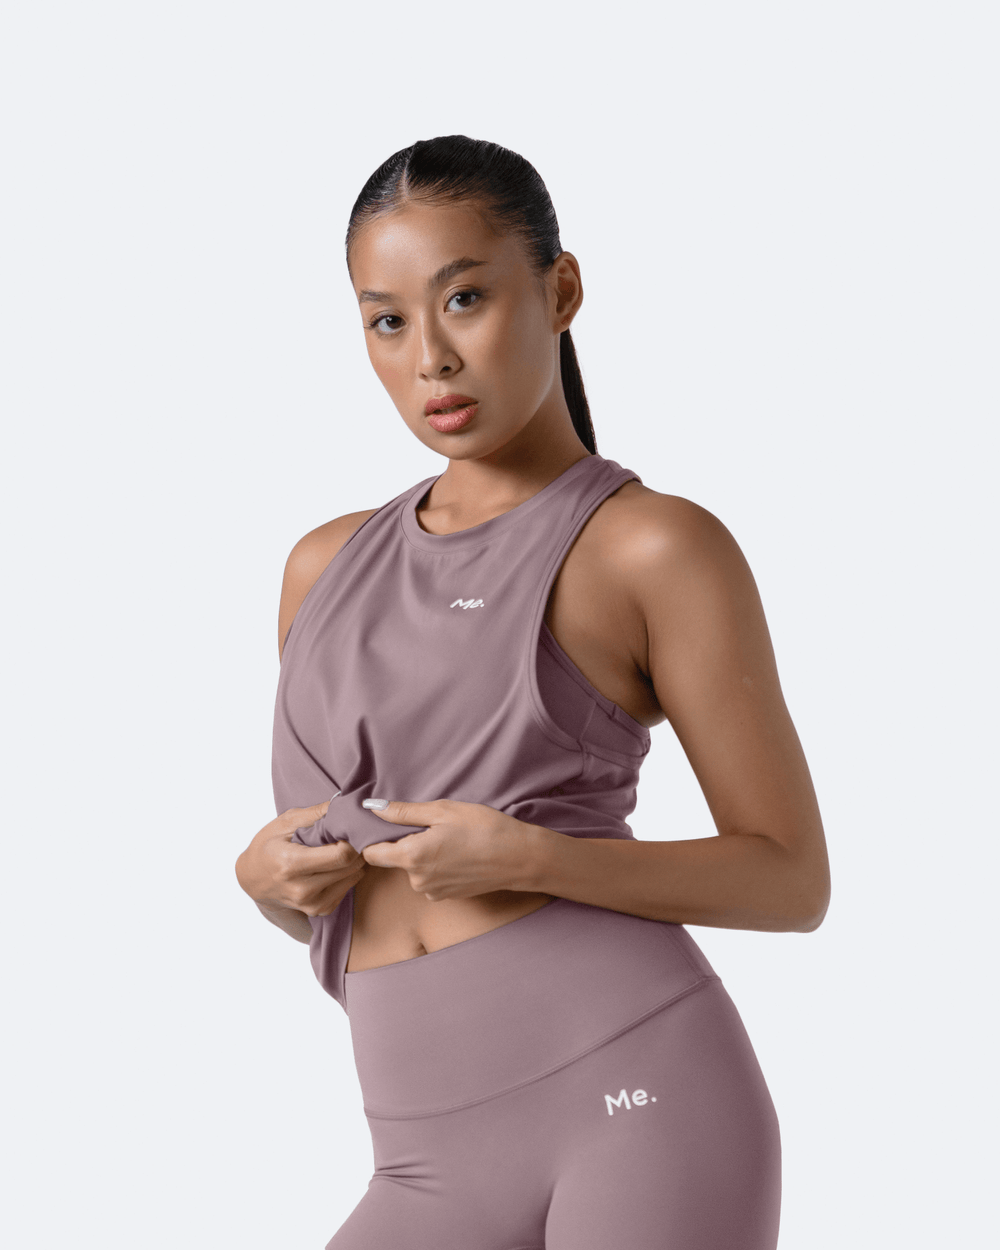 BetterMe High Waisted Leggings and Cropped Long Sleeve Top Set in Pink